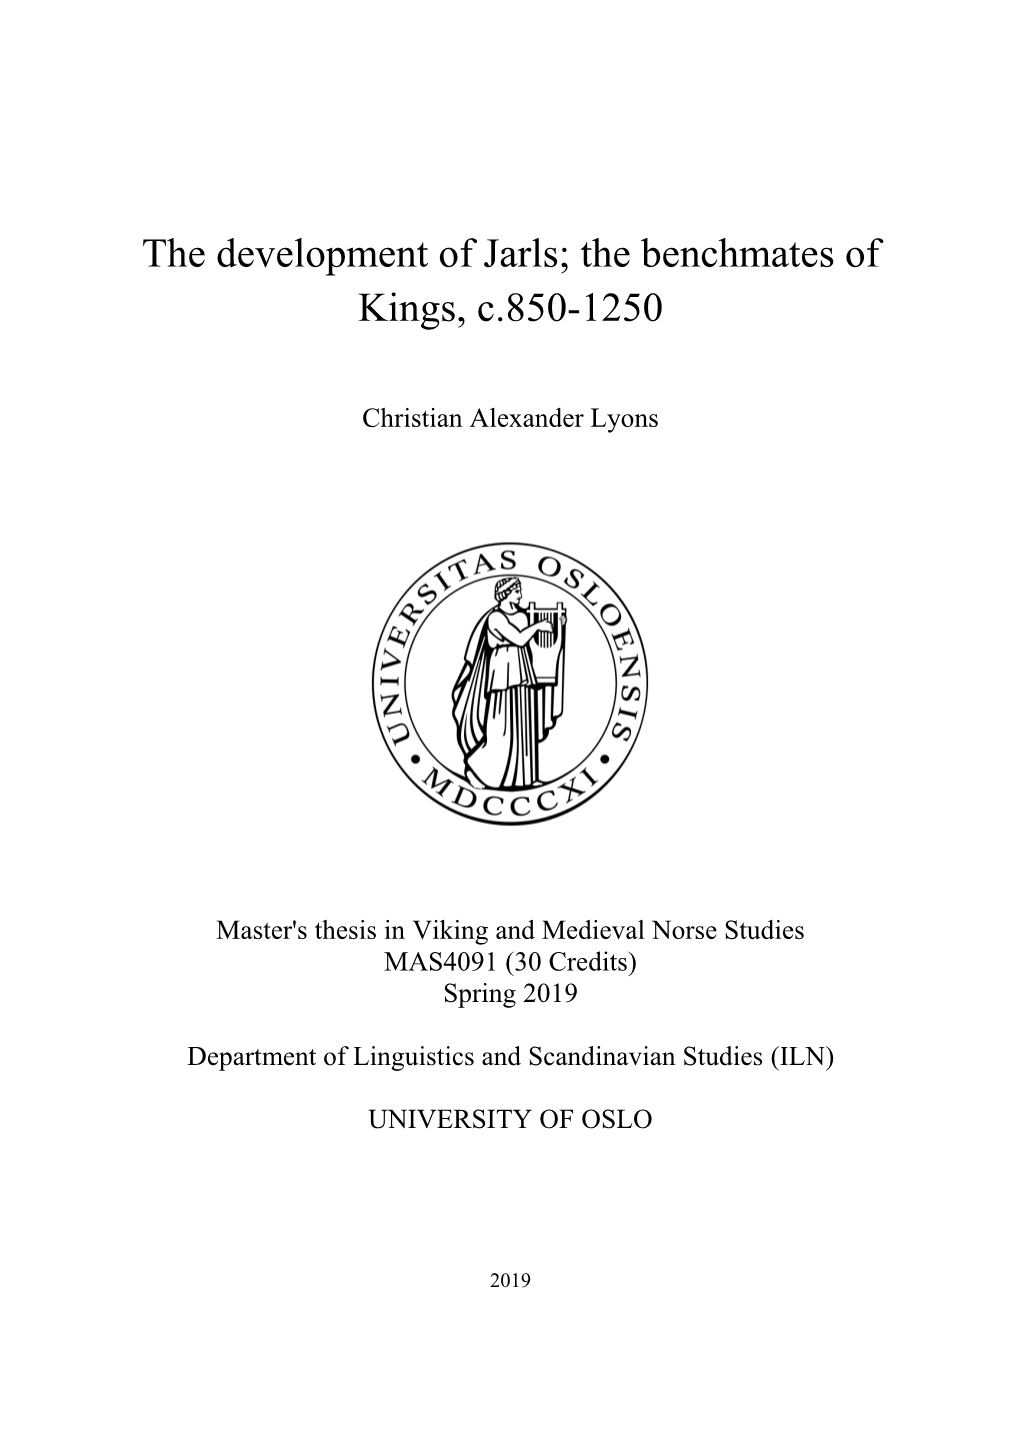 The Development of Jarls; the Benchmates of Kings, C.850-1250